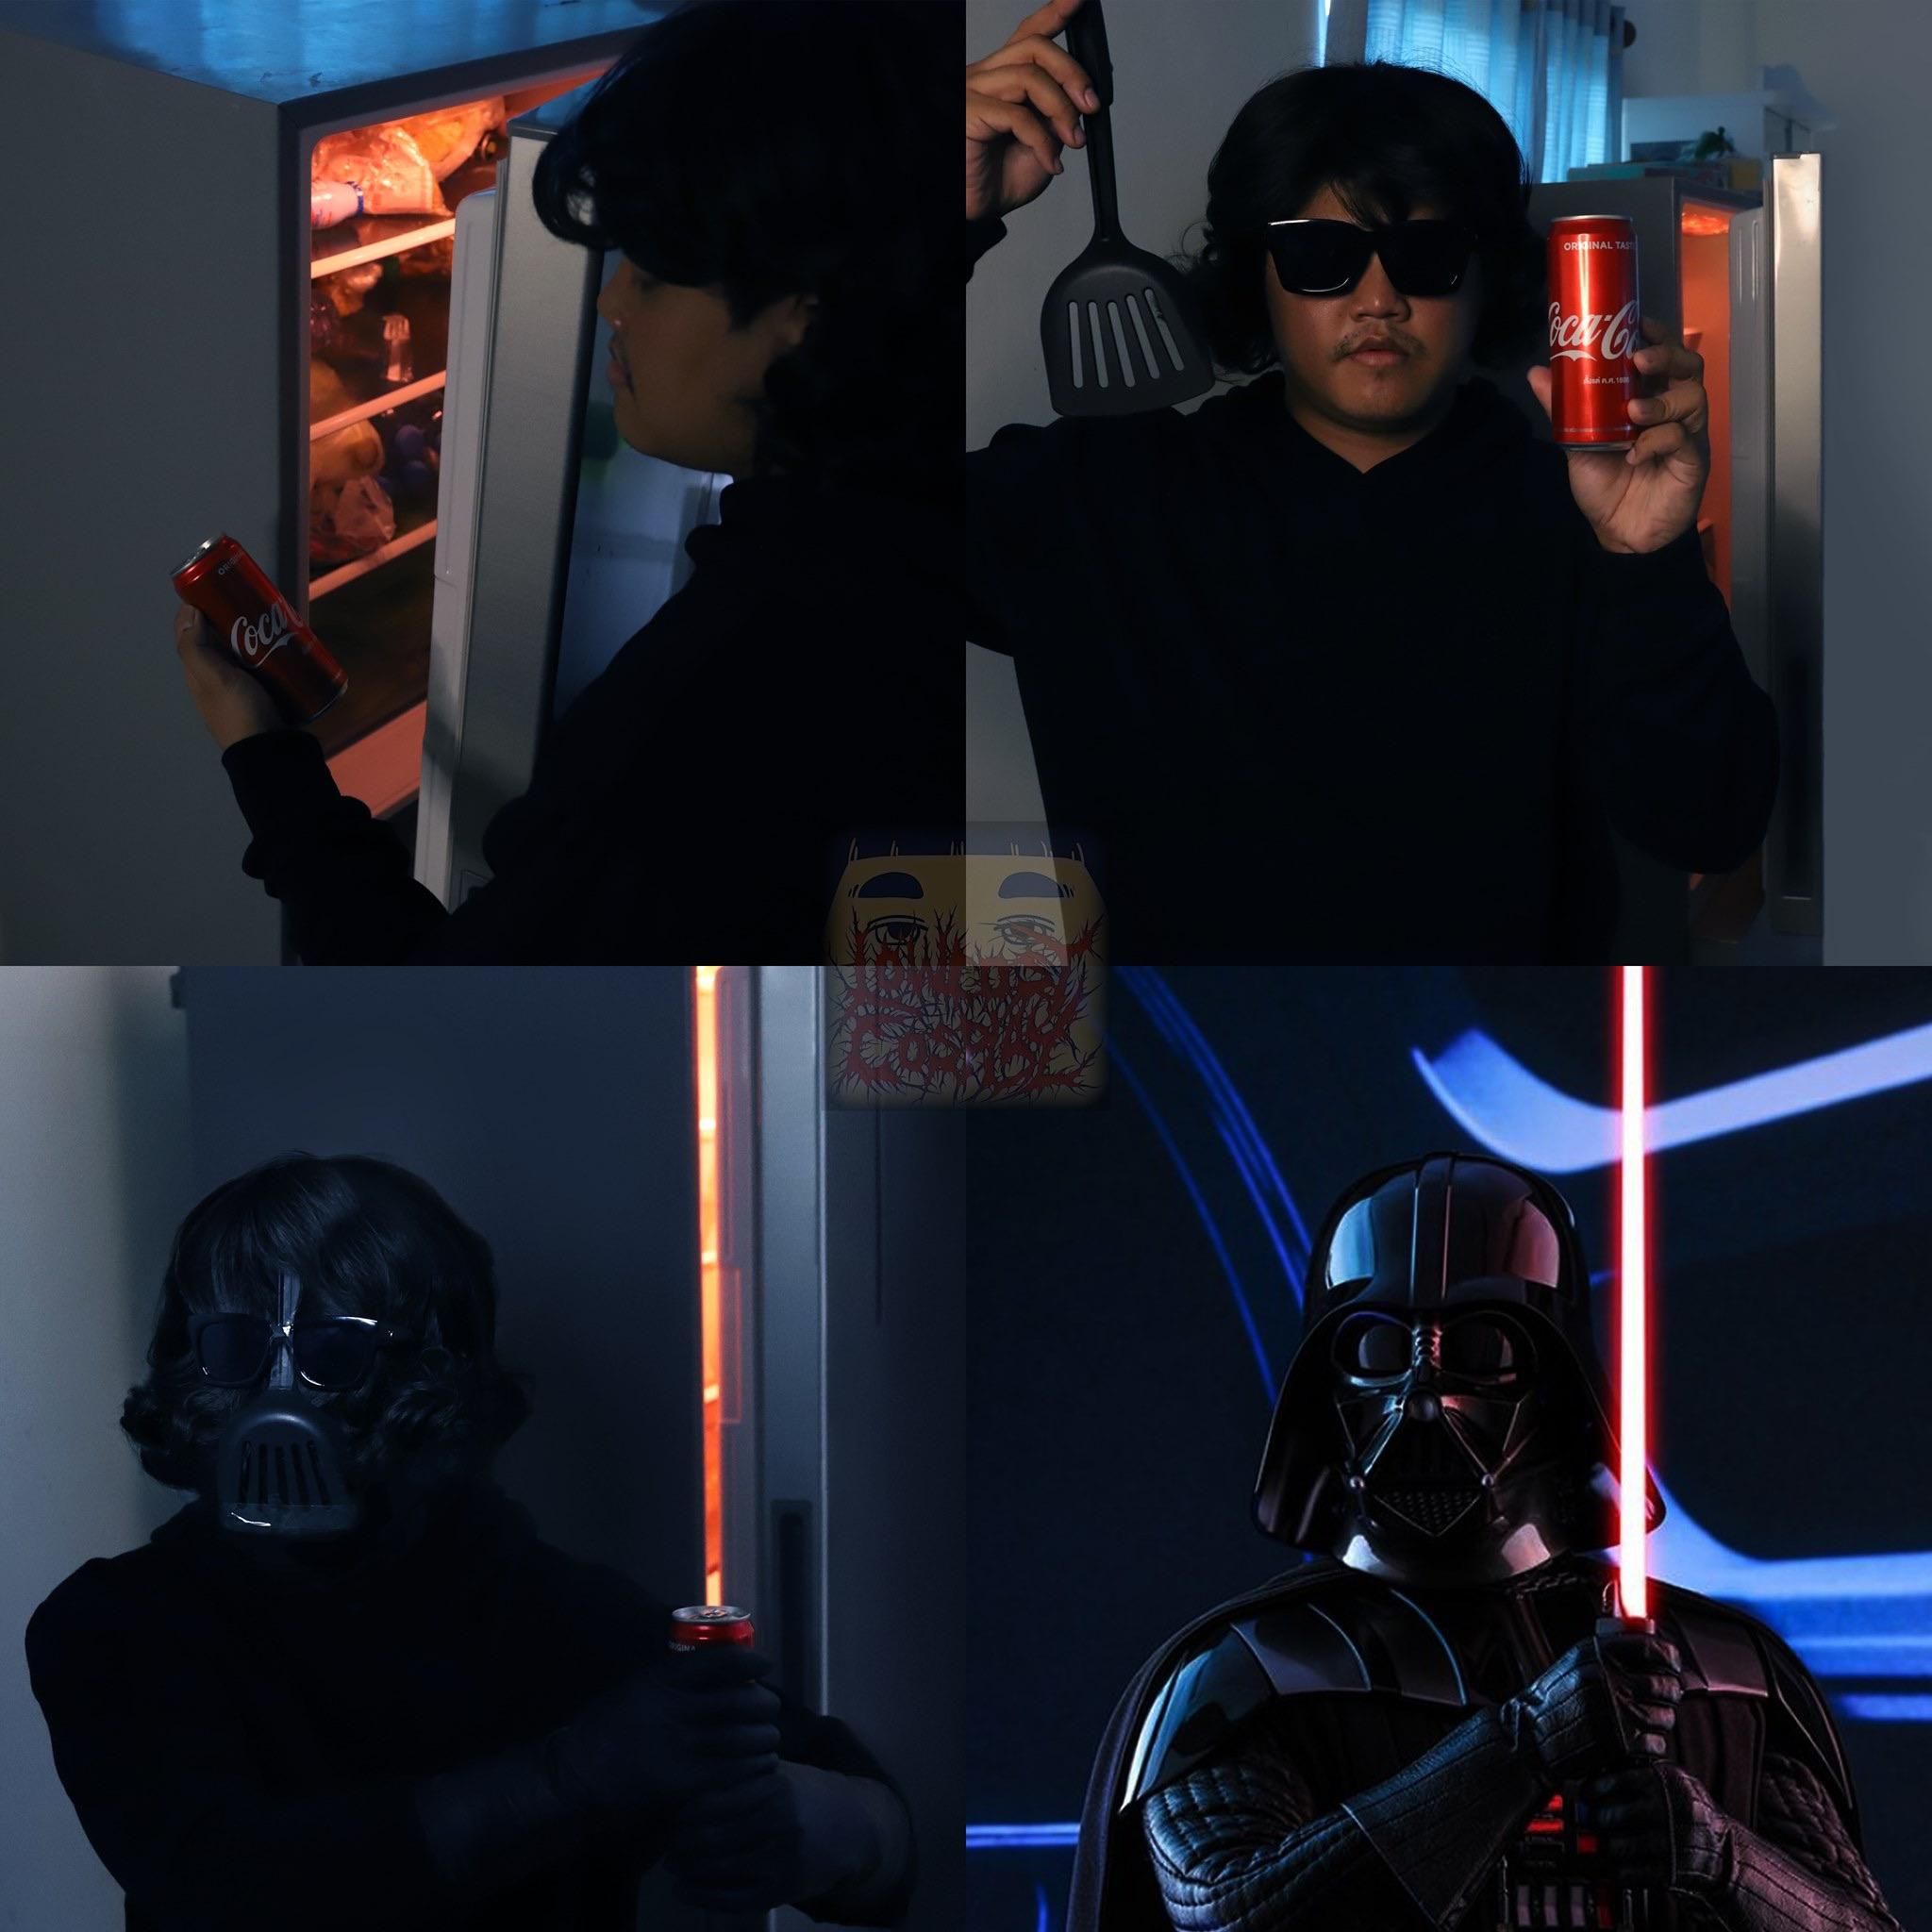 Darth Vader Cosplay - Credit to Low Cost Cosplay